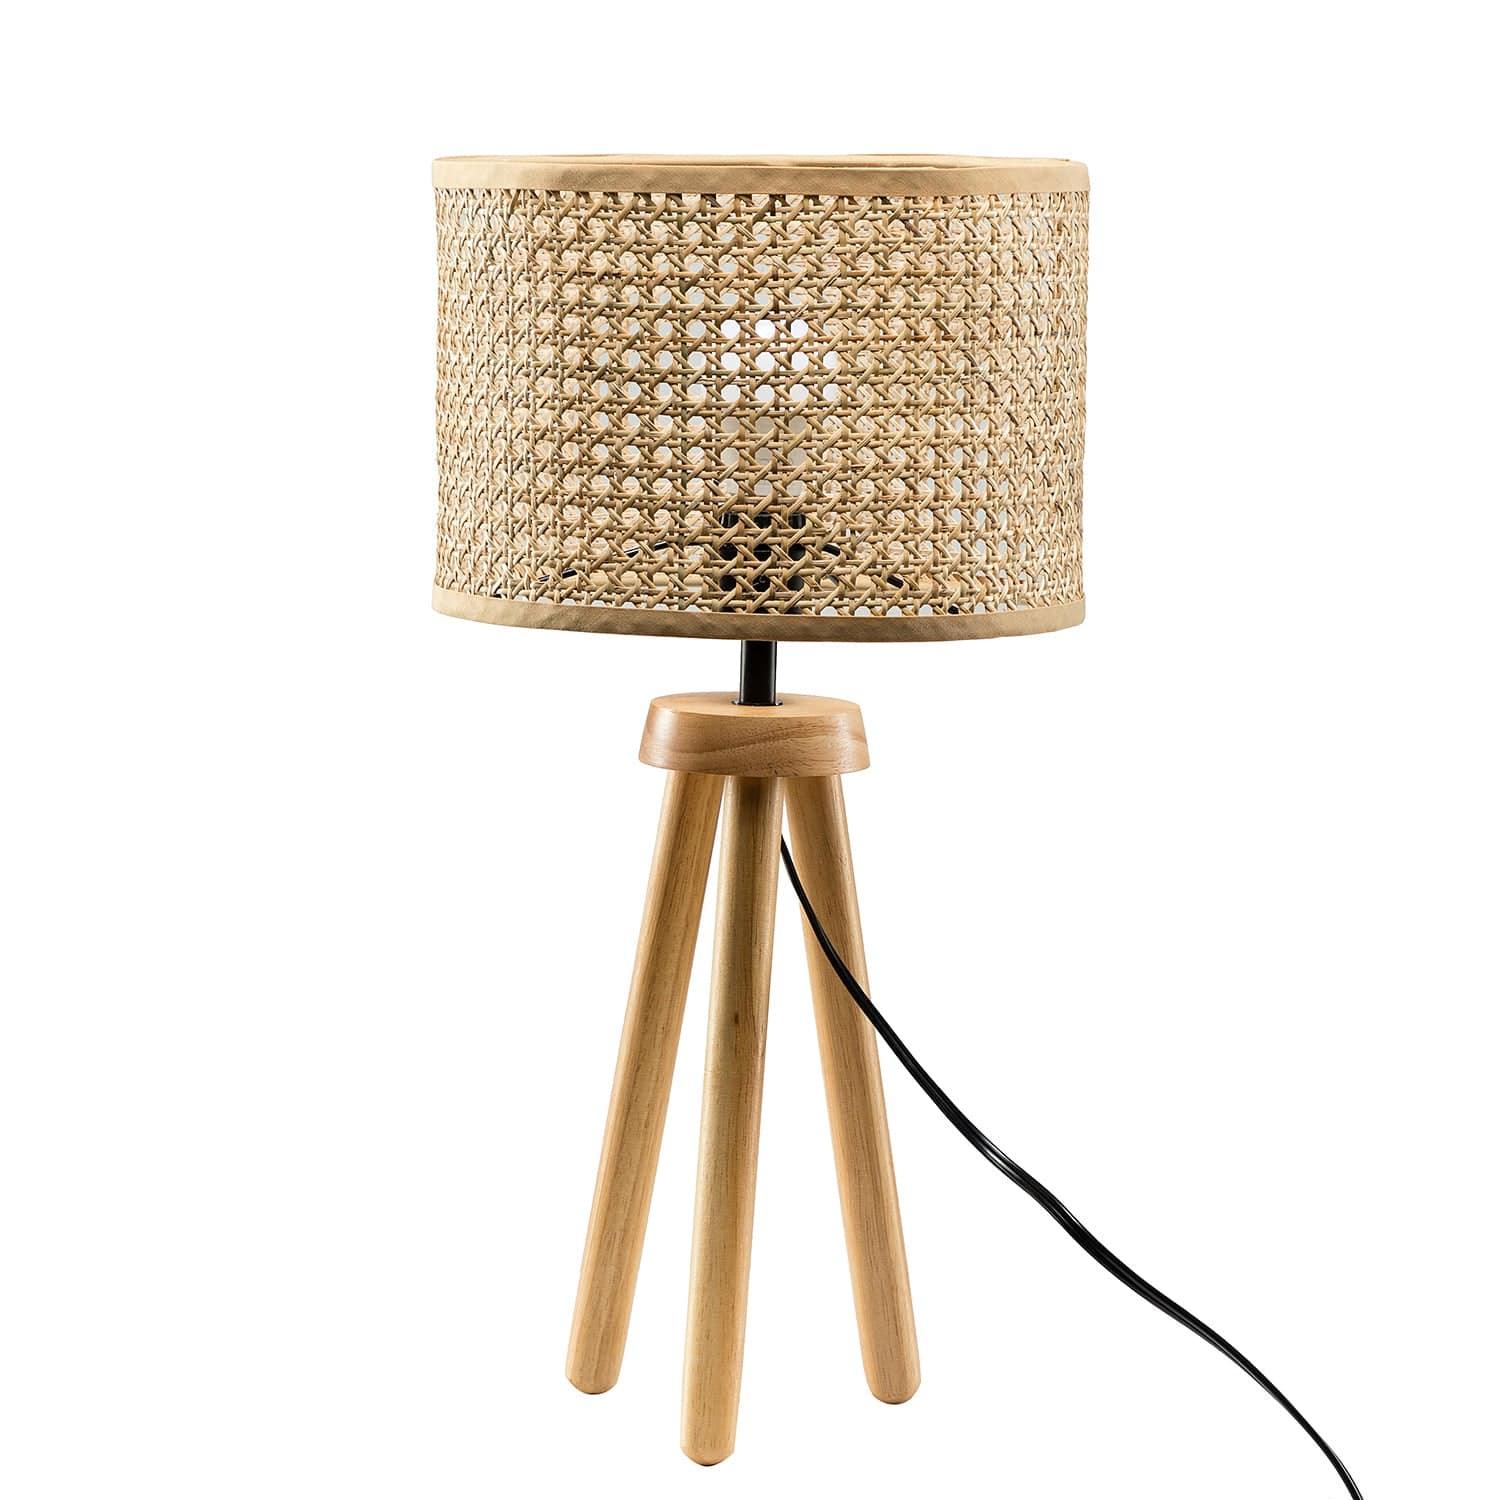 Shop Tenedos Solid Wood Rattan 21.3" Table Lamp with In-line Switch Control Mademoiselle Home Decor